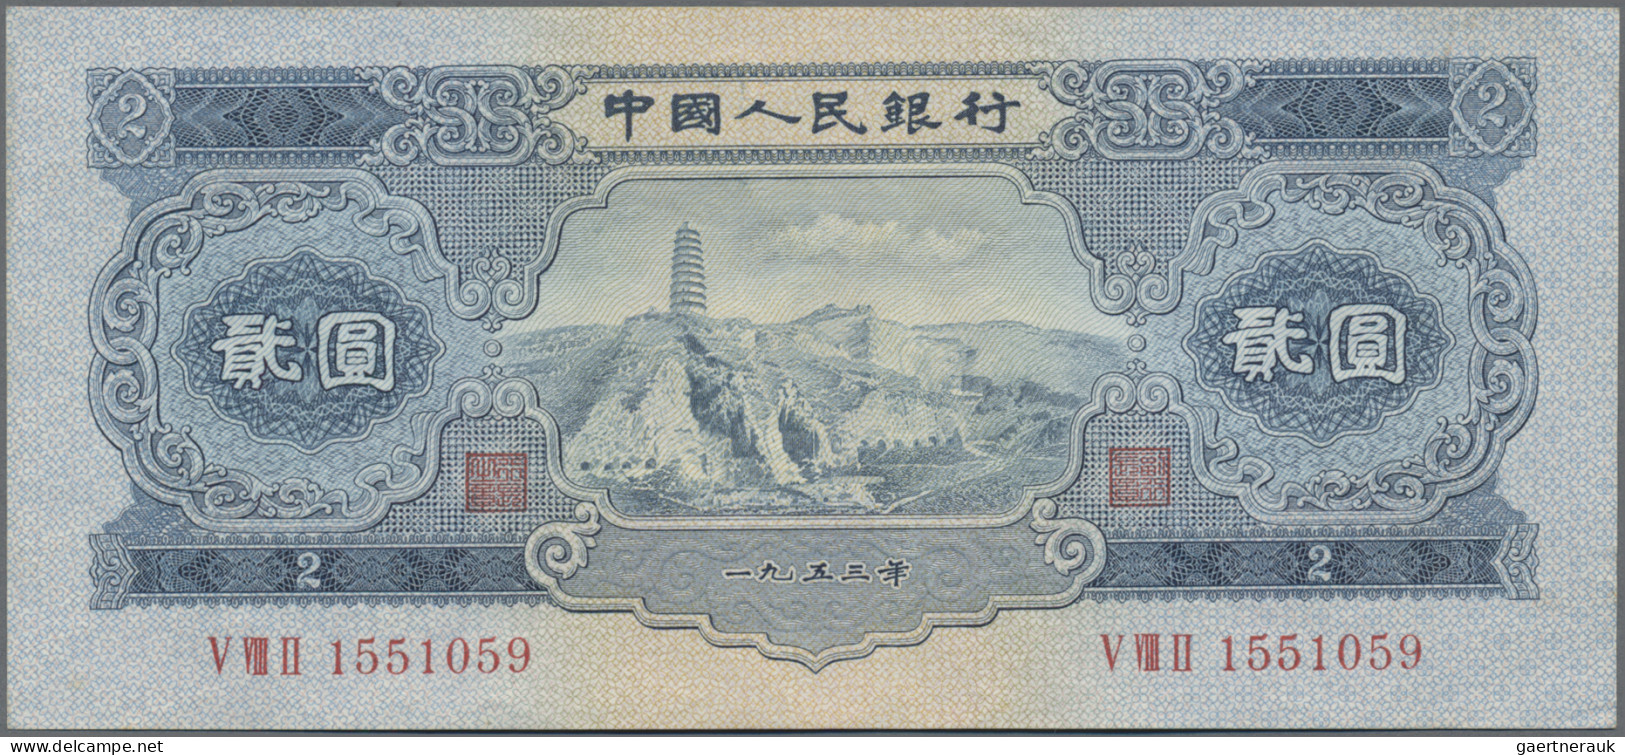 China: Peoples Republic of China 1953 second series set with 4 banknotes compris